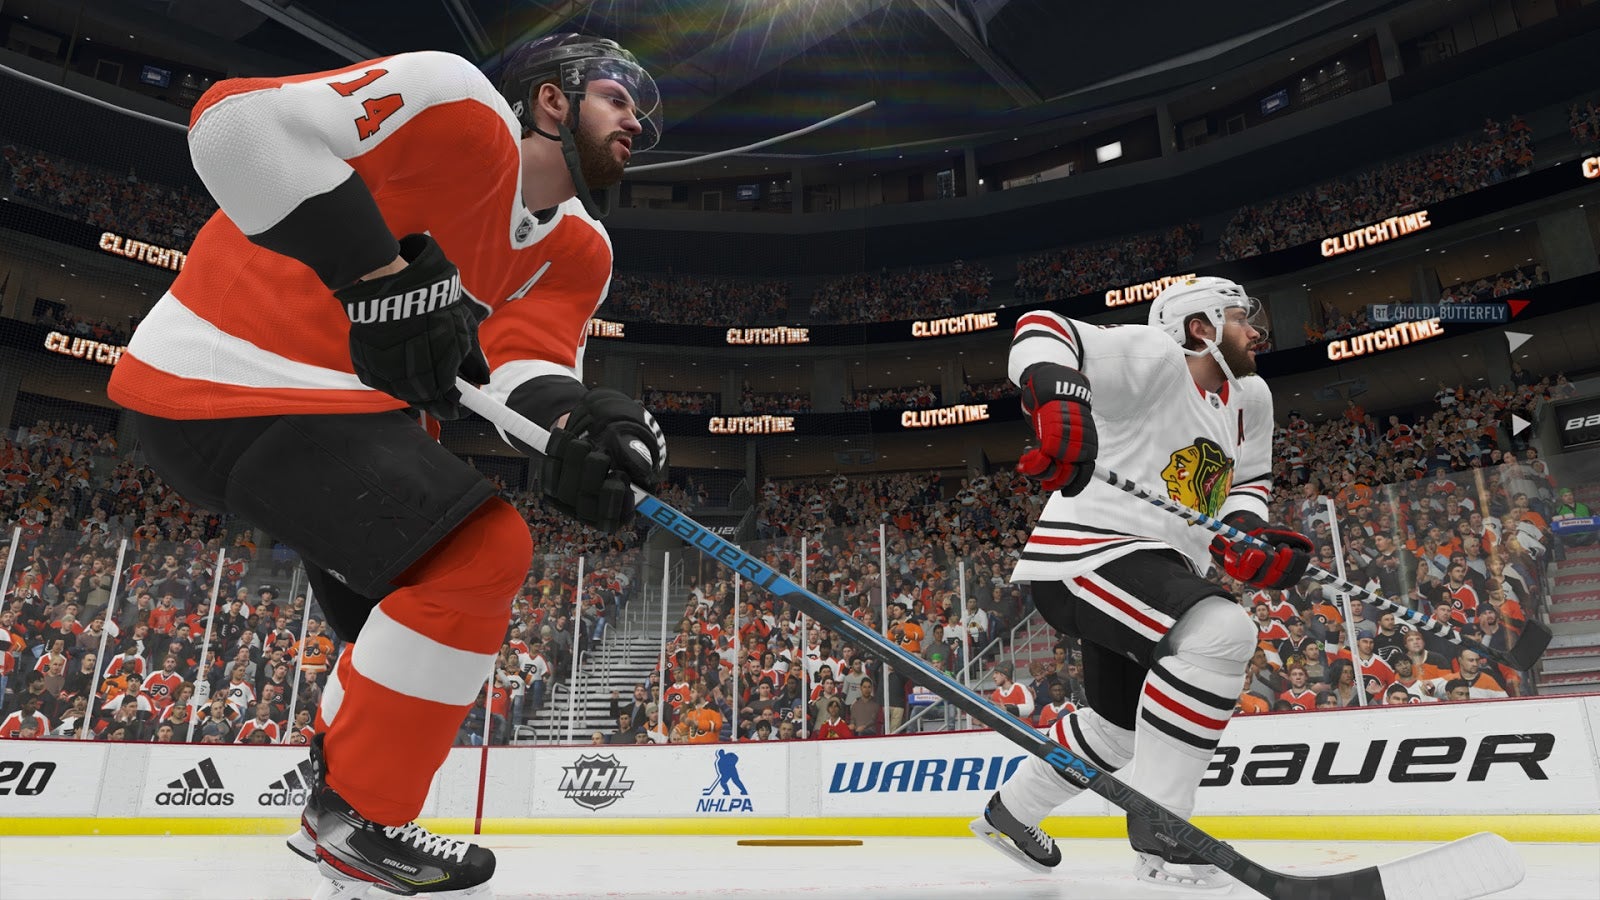 I Never Got Into Real Hockey But I Love NHL Video Games